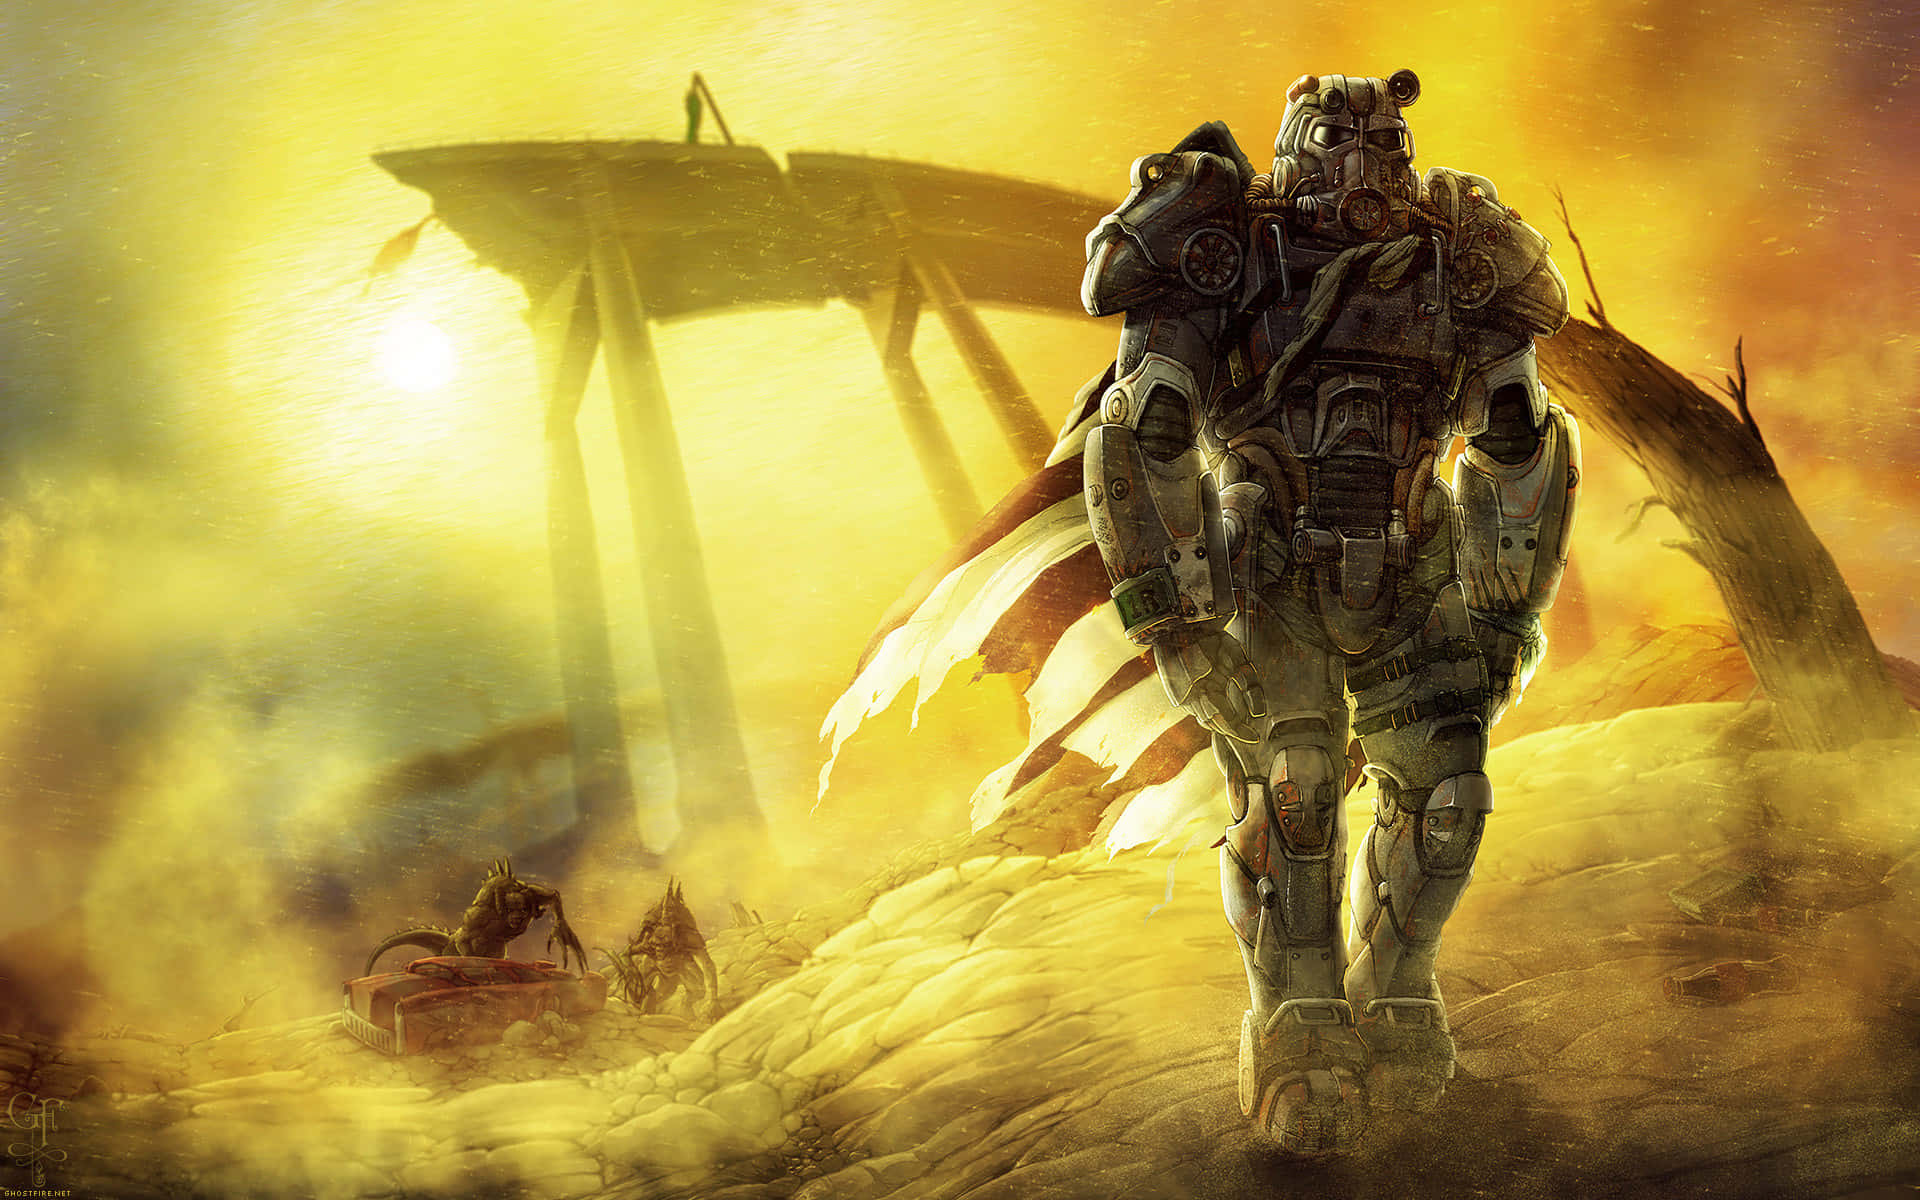 A Fallout 4 Power Armor stands valiantly against a desolate, post-apocalyptic background. Wallpaper